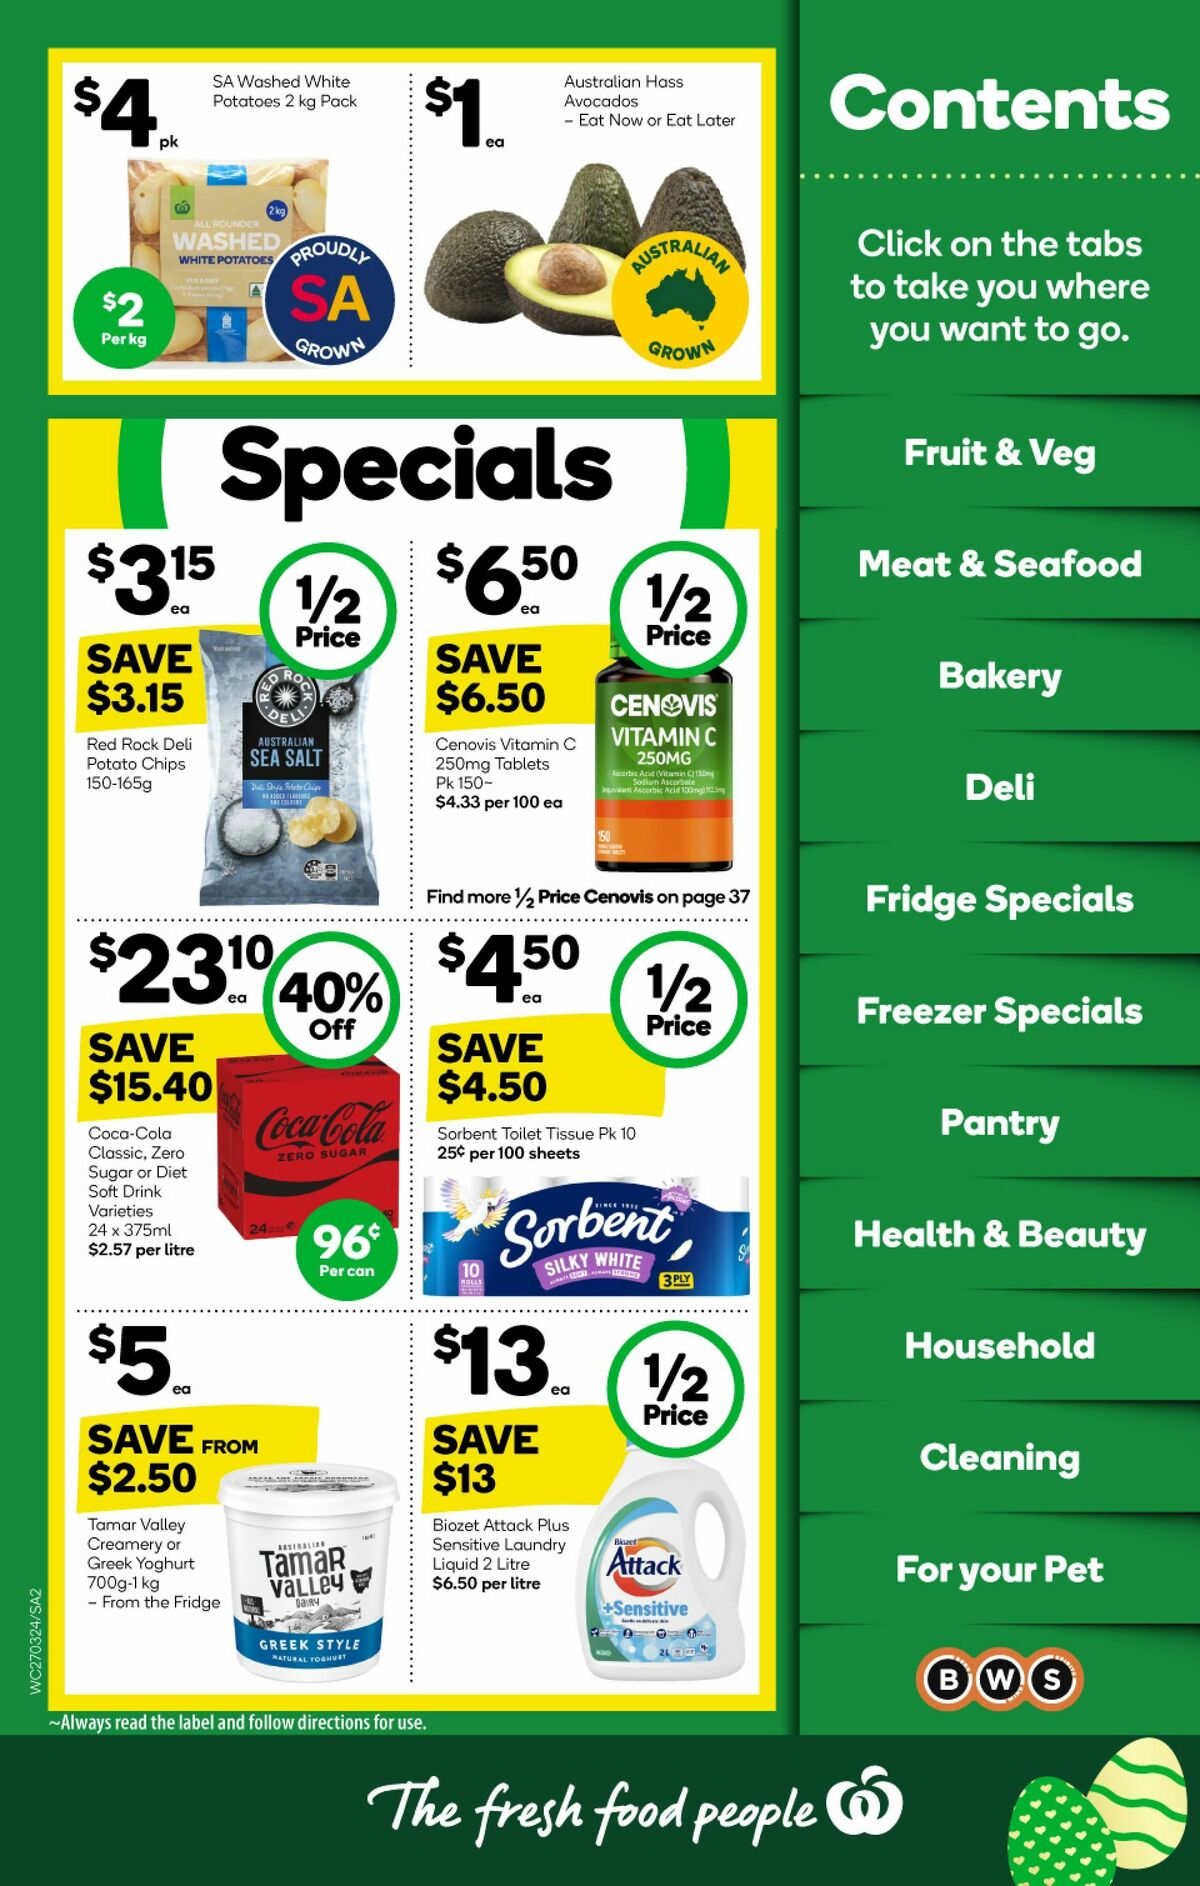 Woolworths Catalogues from 27 March